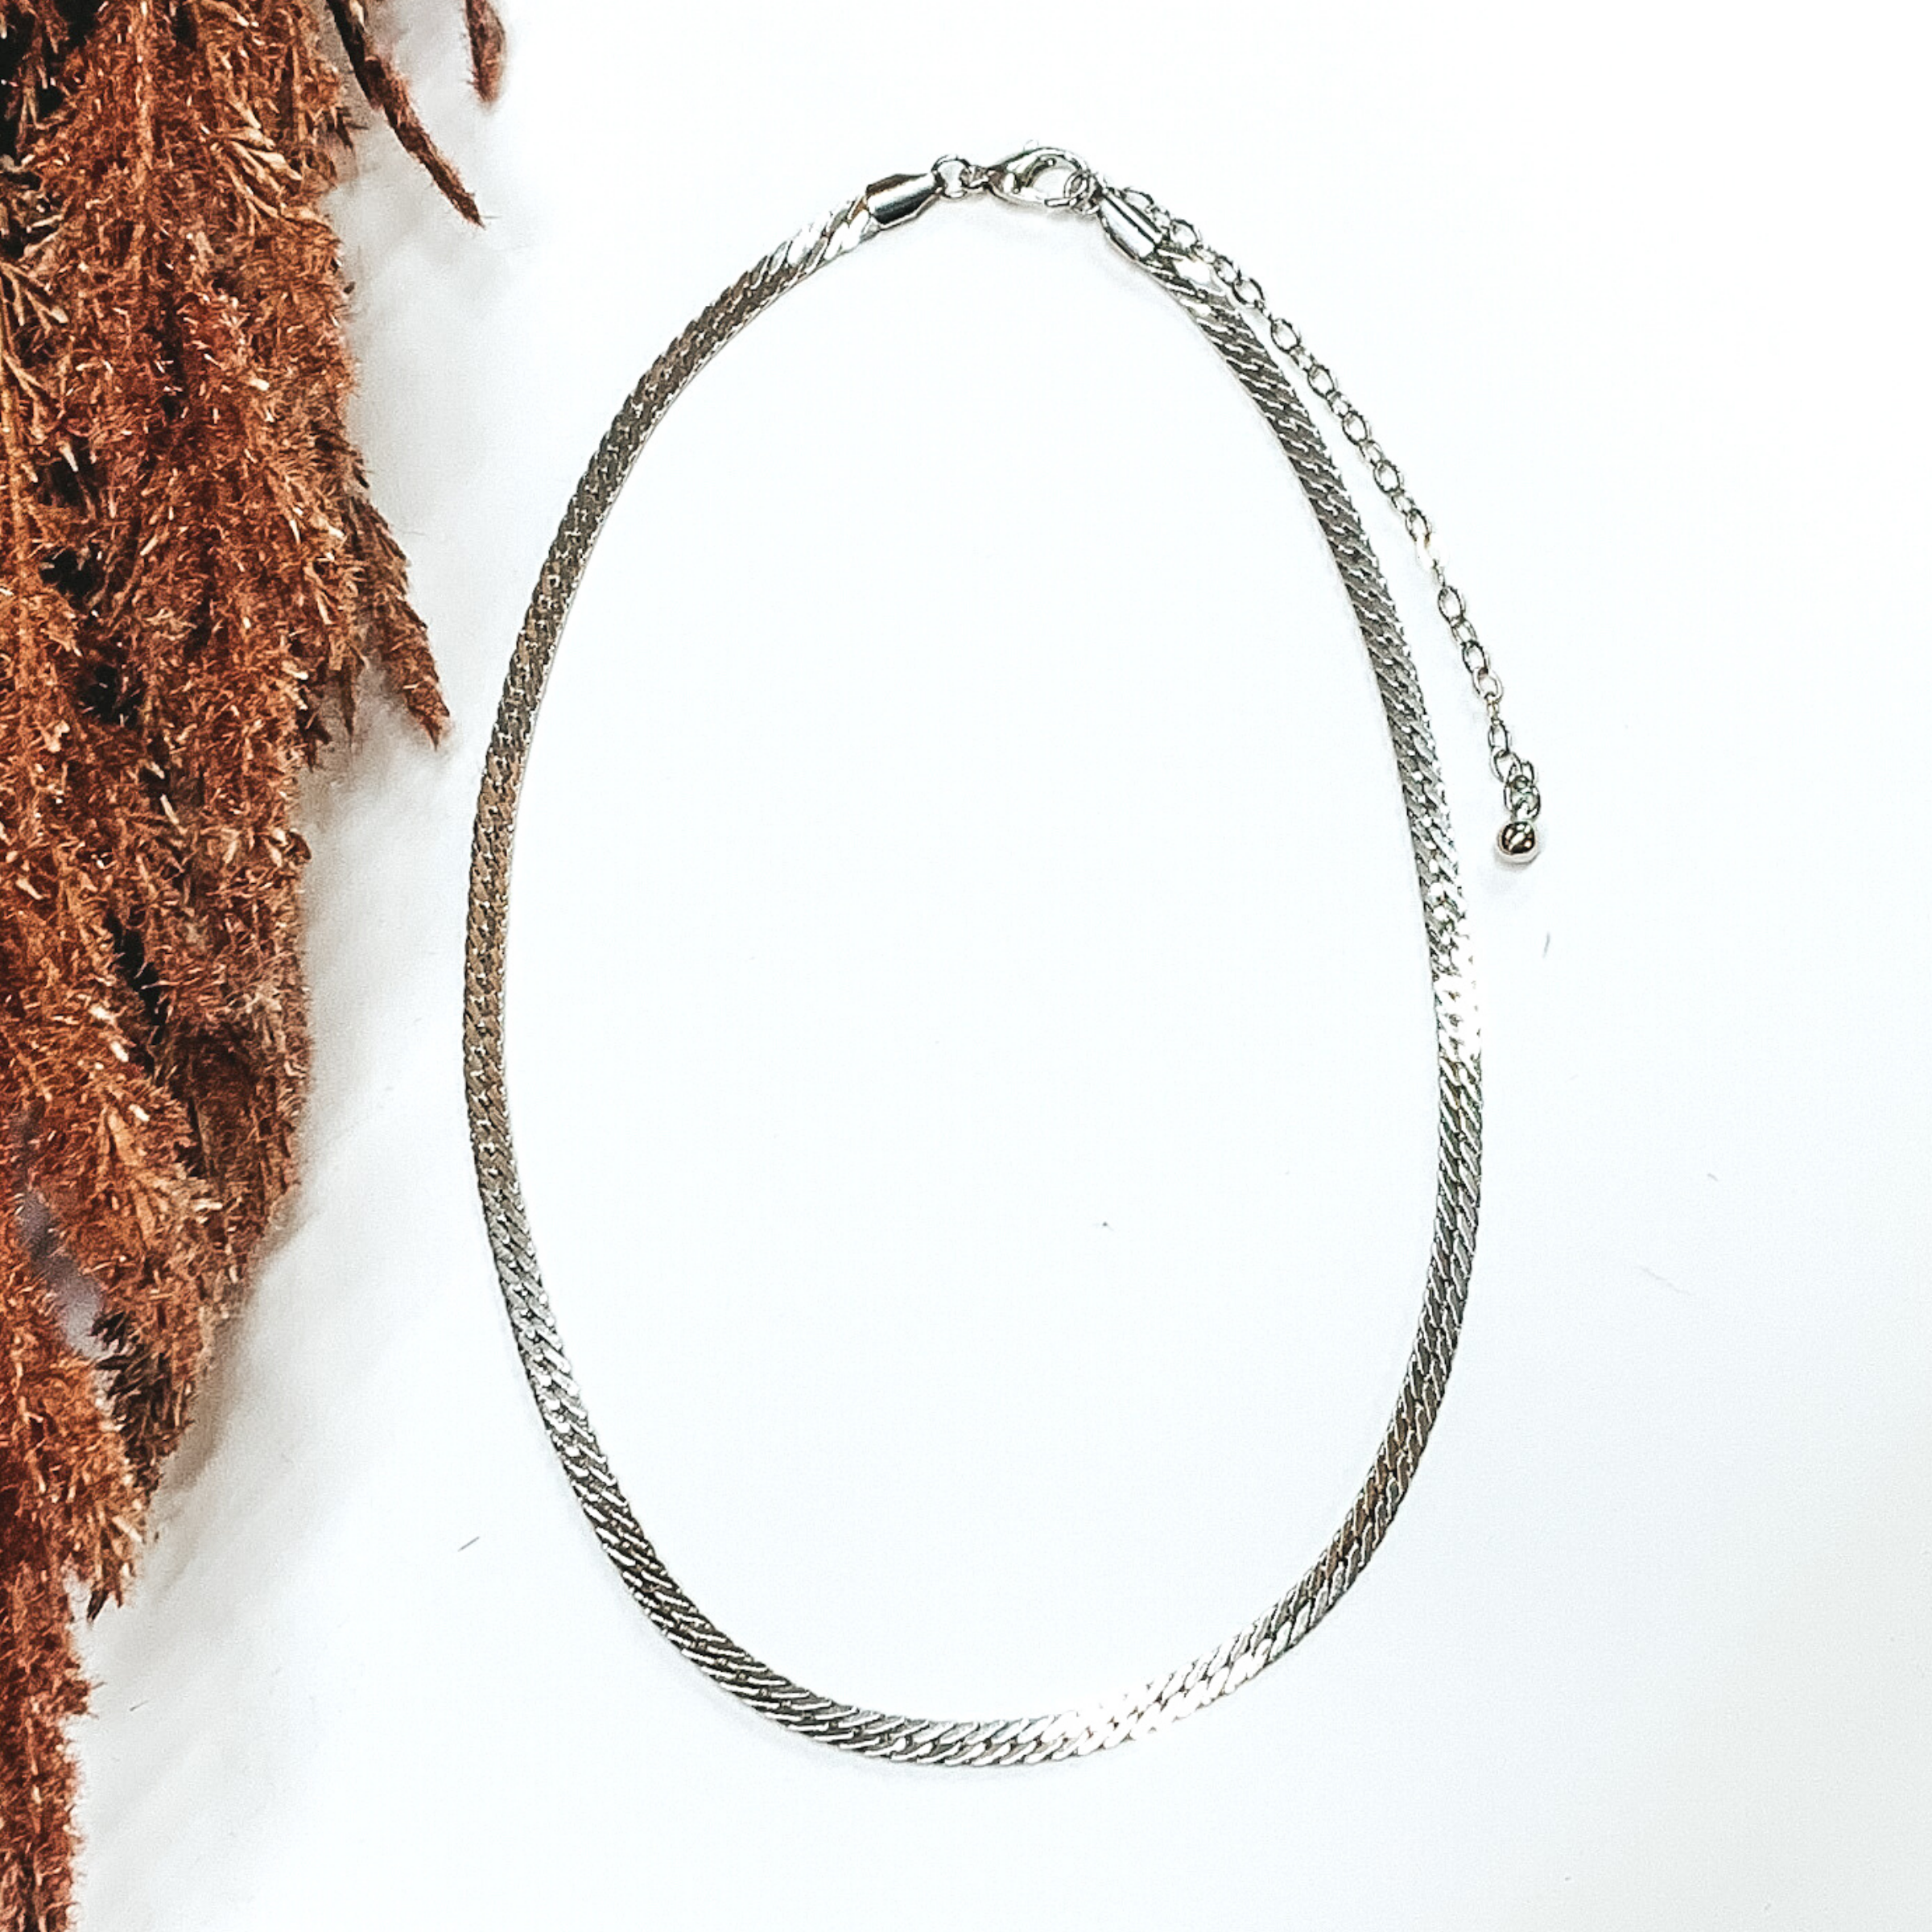 Simple flat snake chain necklace in silver. This necklace is pictured on a white background with brown floral on the side of the pic. 